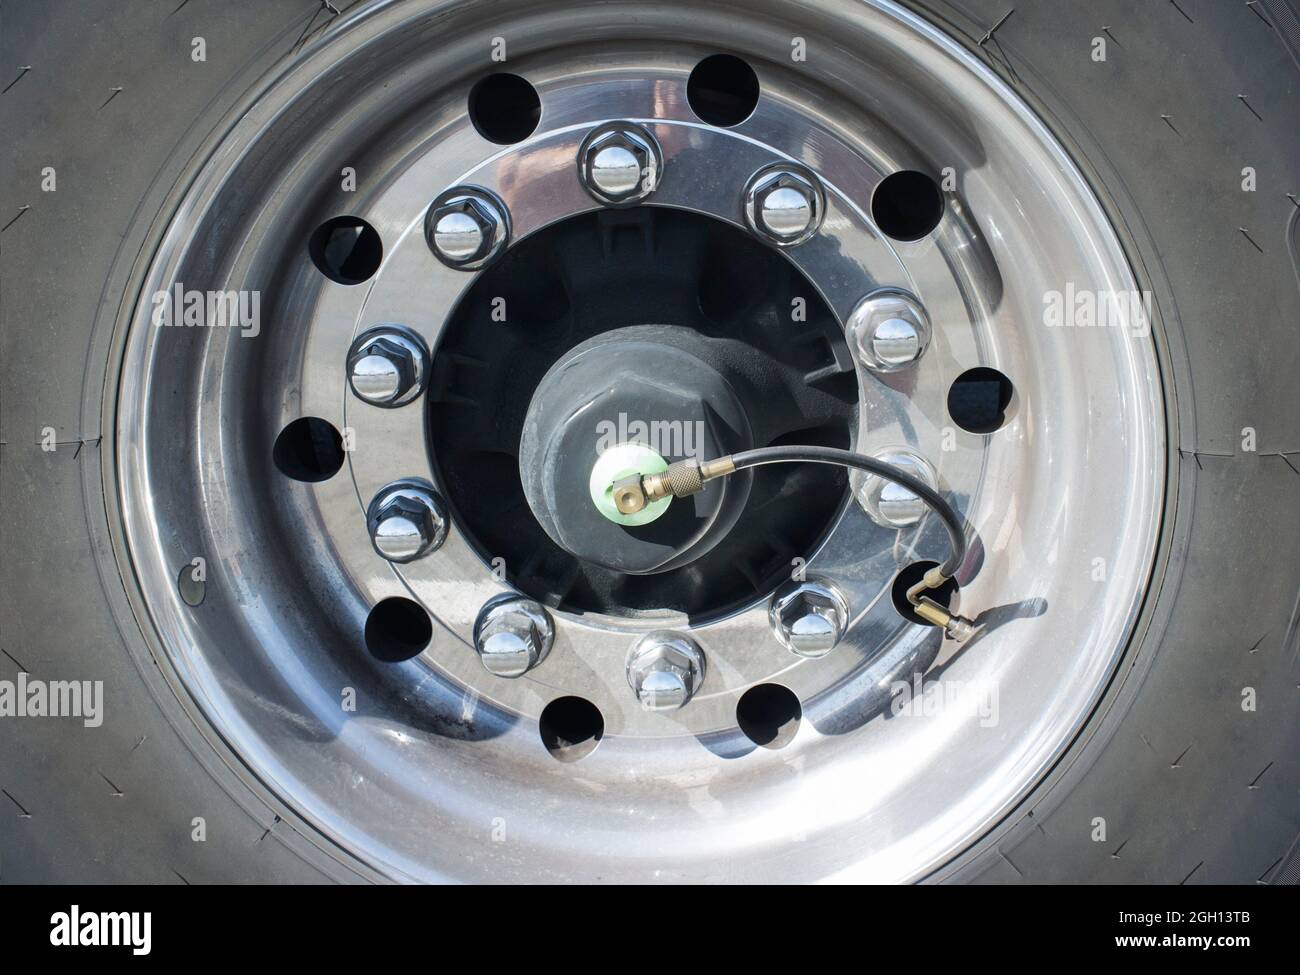 Truck wheel equipped with tire inflation system. Closeup. Stock Photo